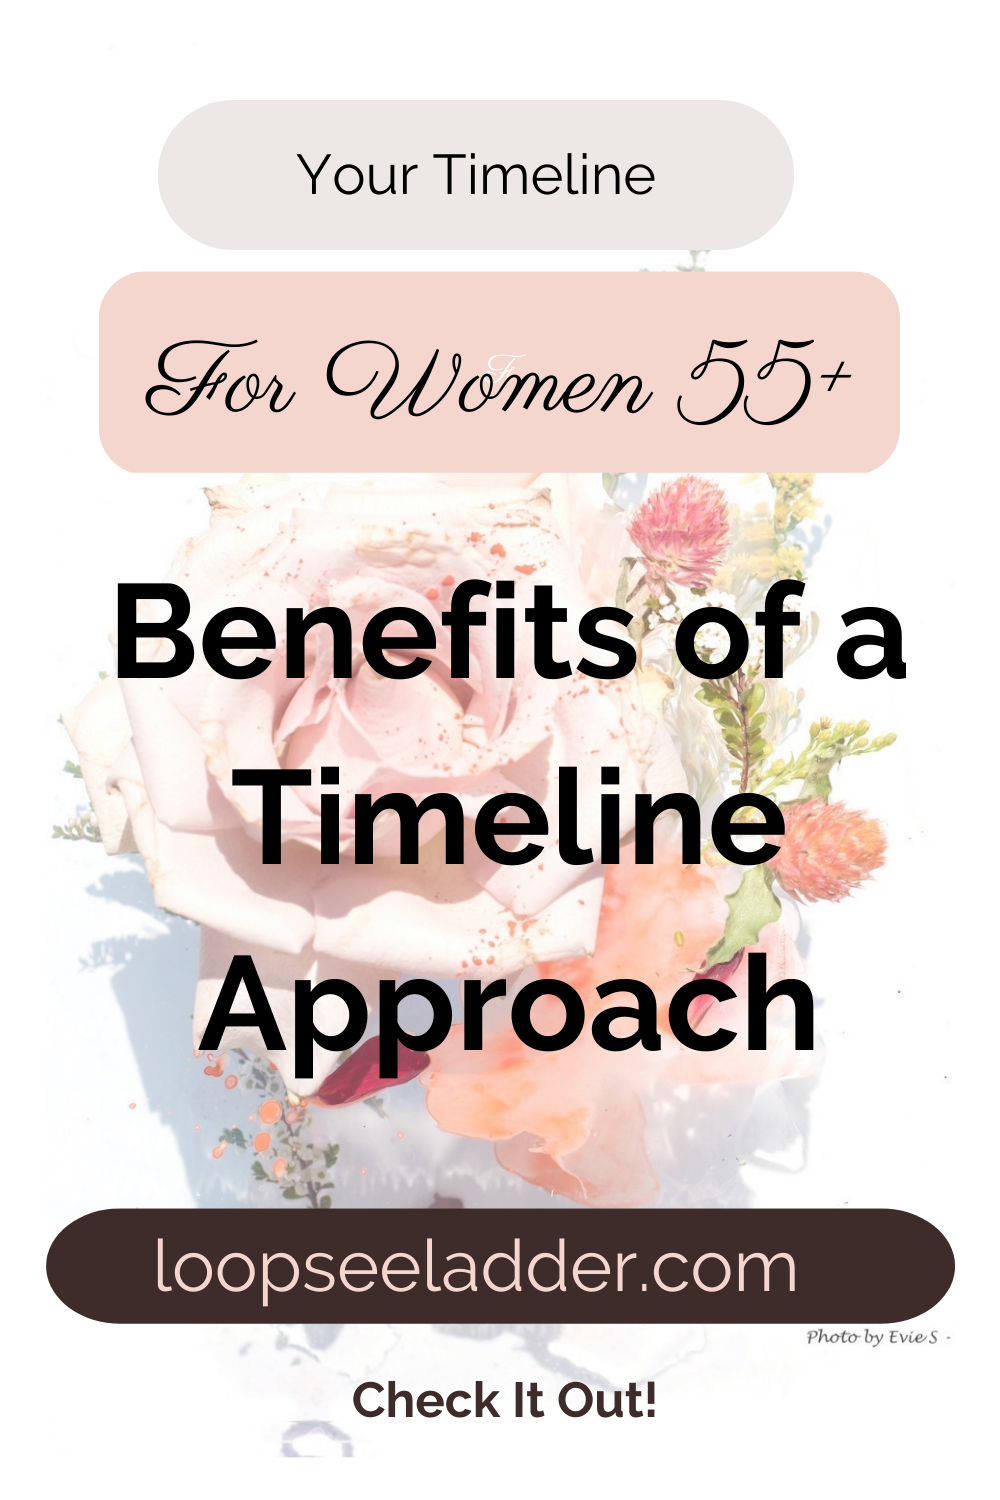 Benefits of a Timeline Approach for Women 55+